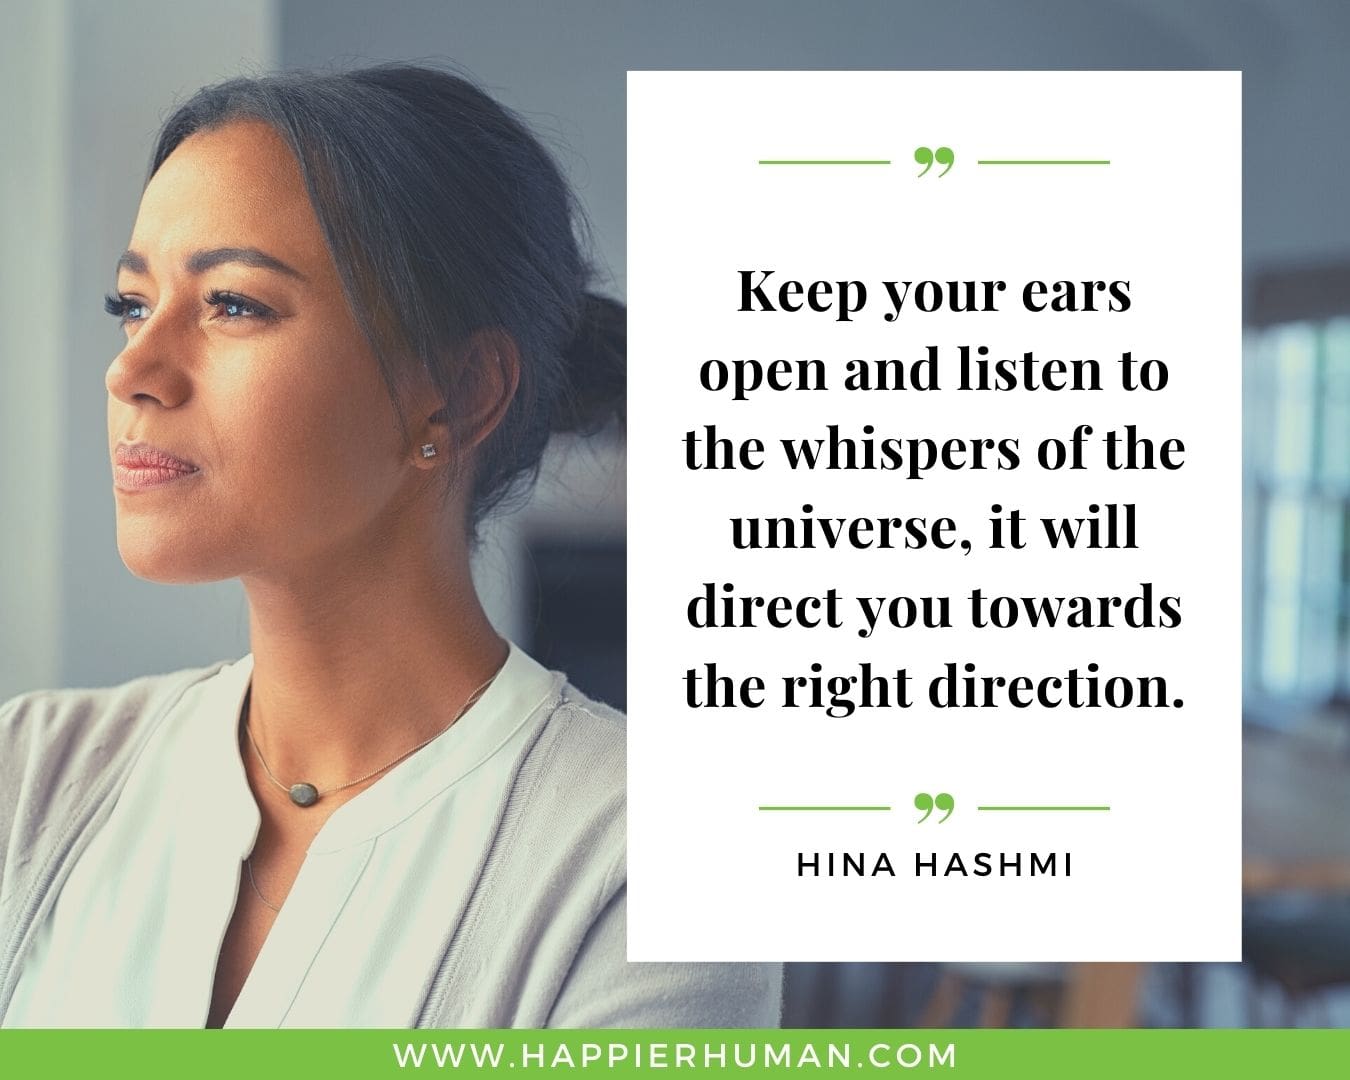 Overthinking Quotes - "Keep your ears open and listen to the whispers of the universe, it will direct you towards the right direction." - Hina Hashmi